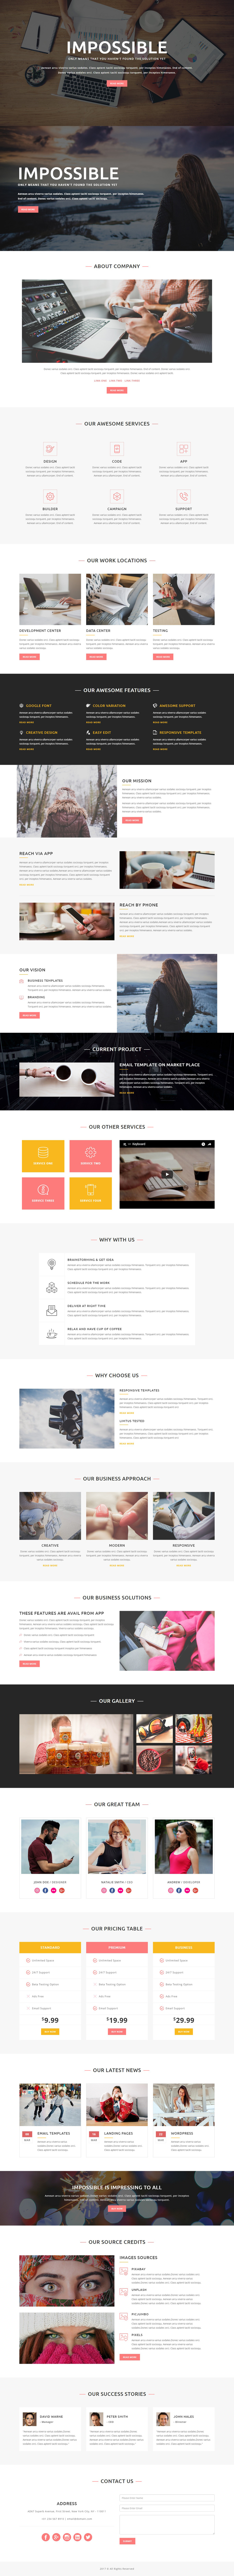 IMPOSSIBLE - PSD Template